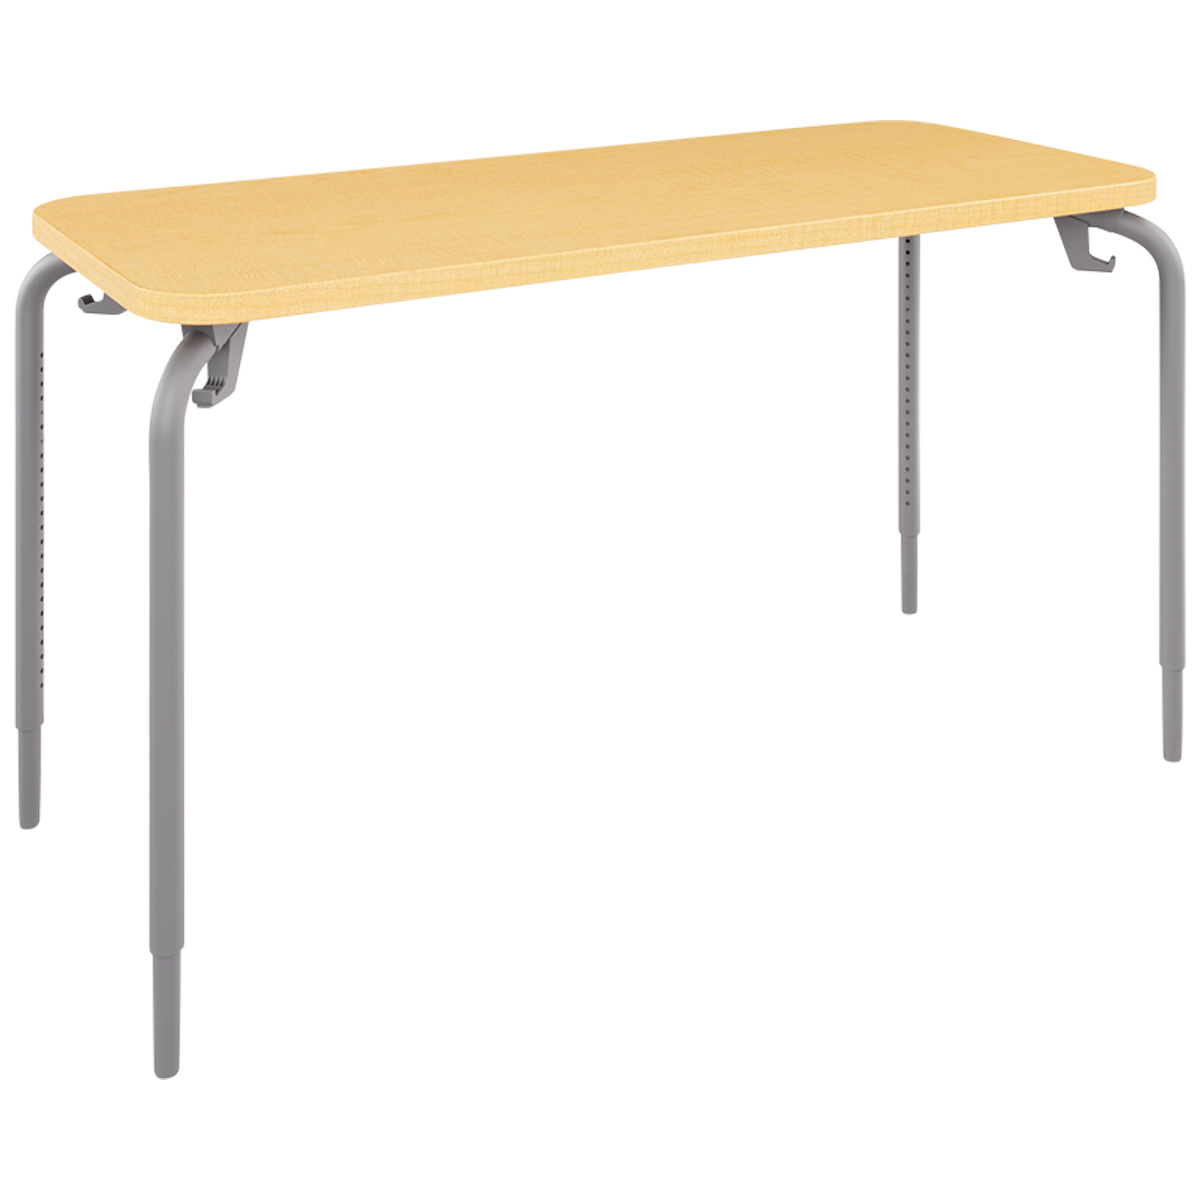 Numbers™ High Range Two-Student Desk 24 x 54